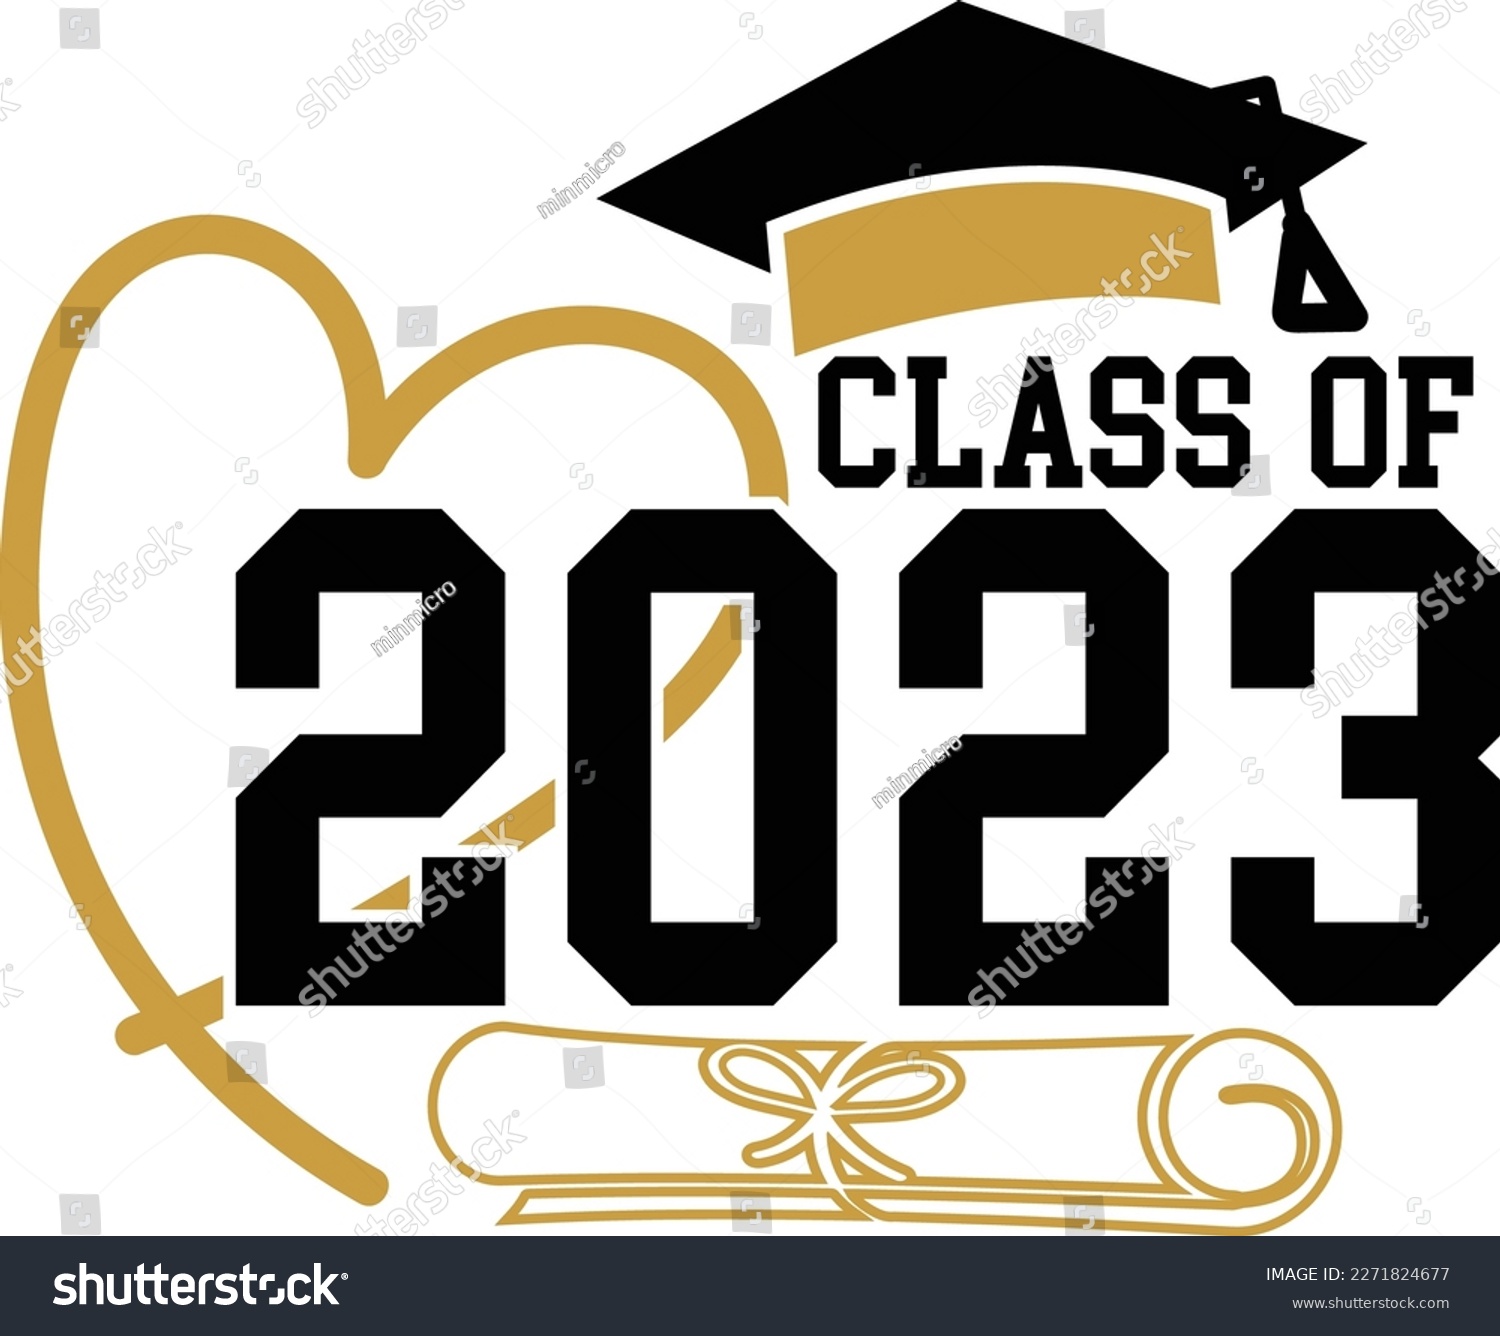 SVG of Class of 2023 With Graduation Cap Svg, Template For Graduation Party Design, Vector illustration. svg